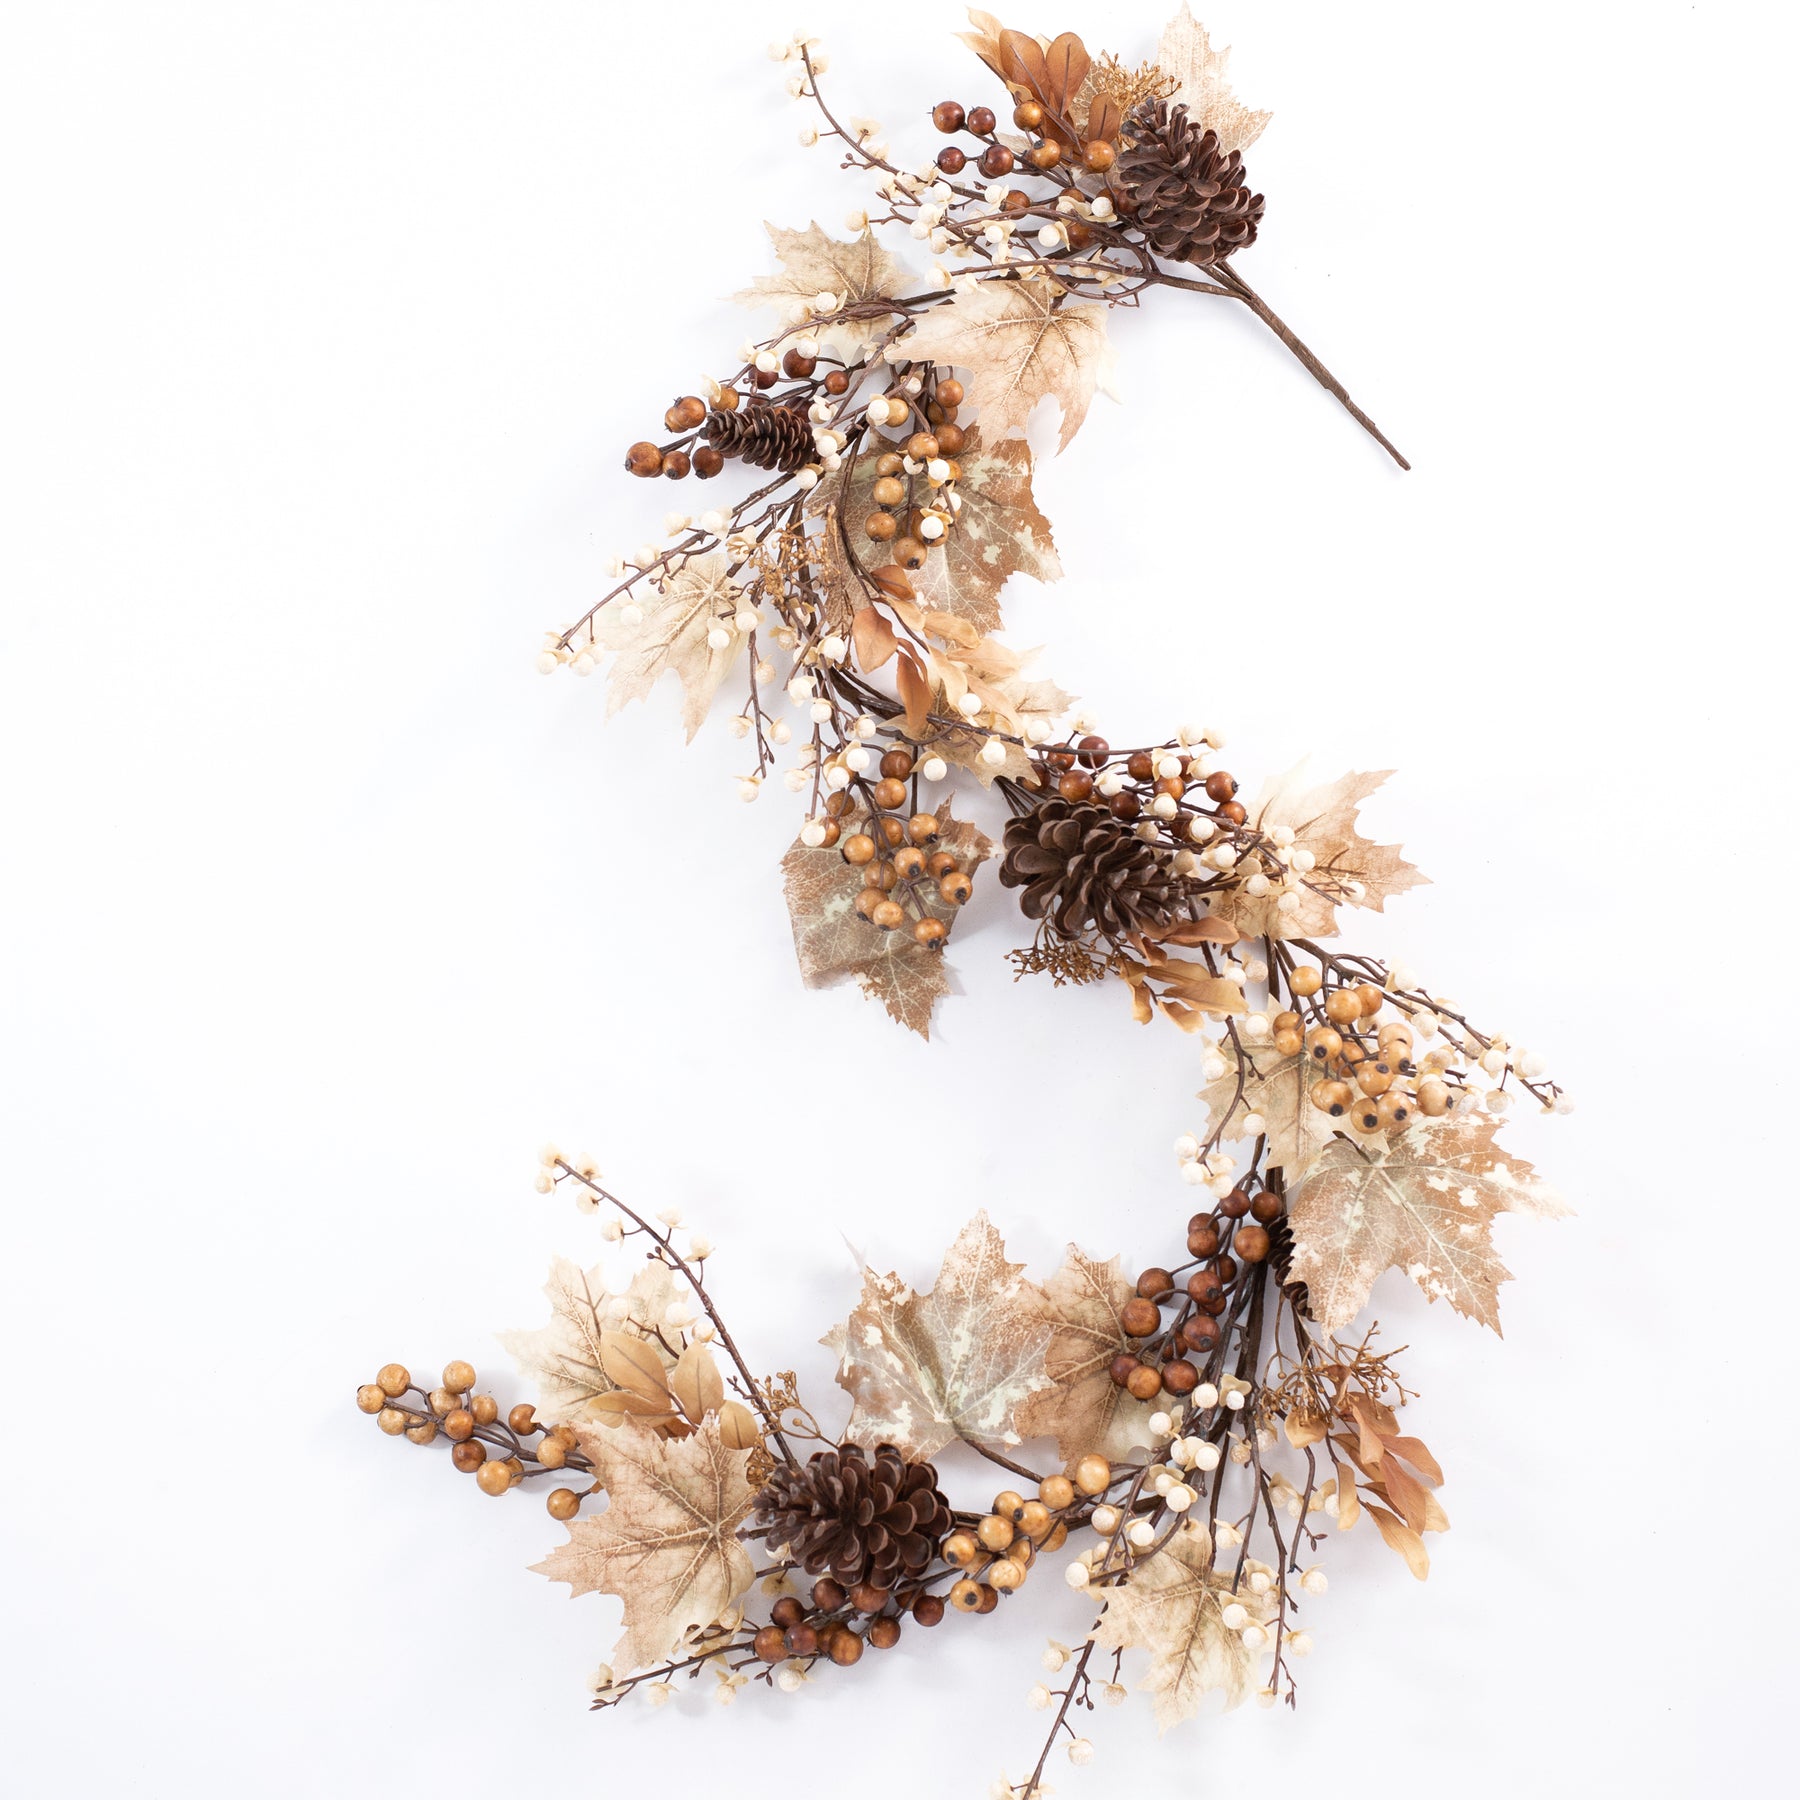 Fall Decorating With Pinecones – UTR Decorating